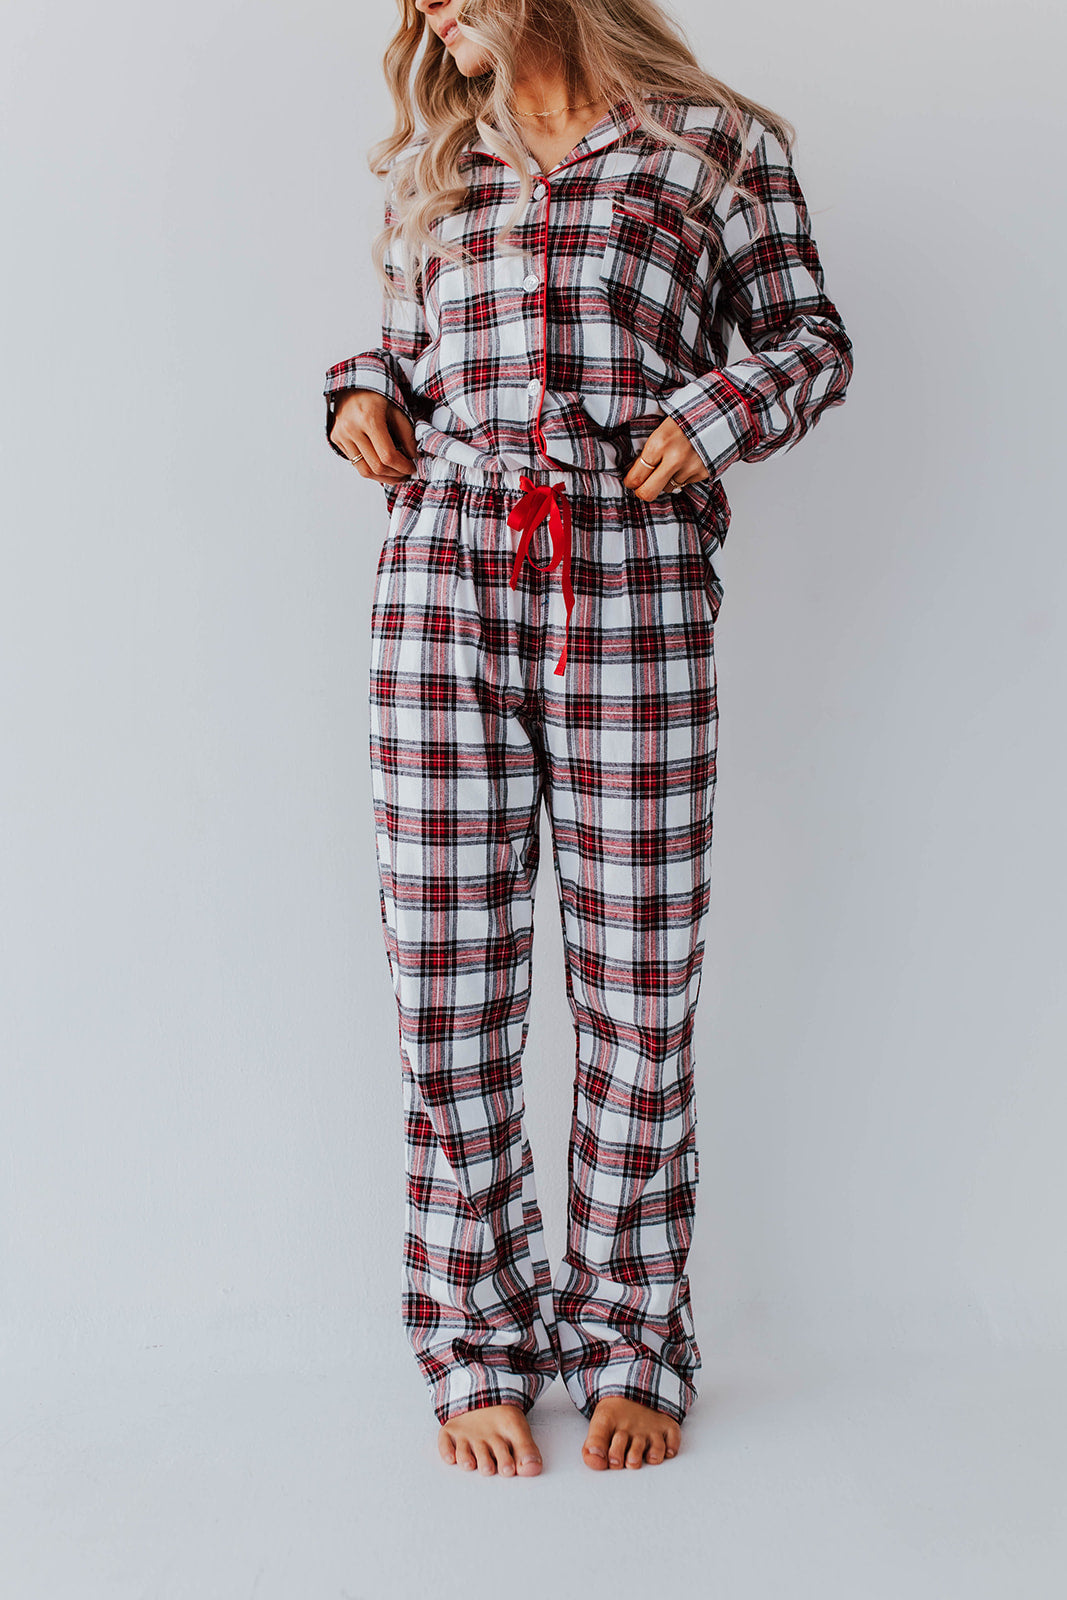 FLANNEL Desert PAJAMAS FIRESIDE PLAID IN Pink THE RED –